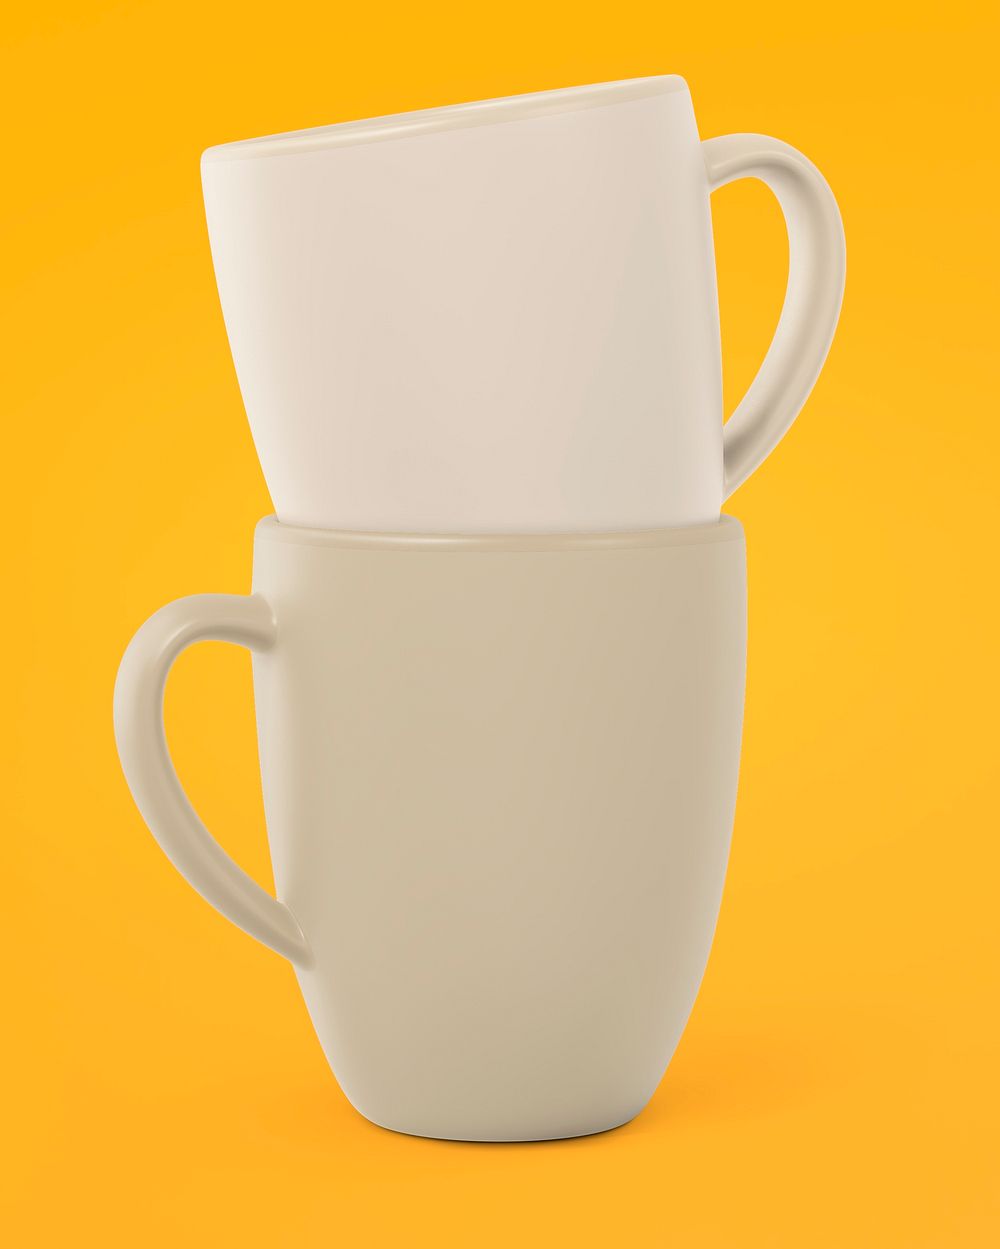 Beige coffee mugs, product design with blank space